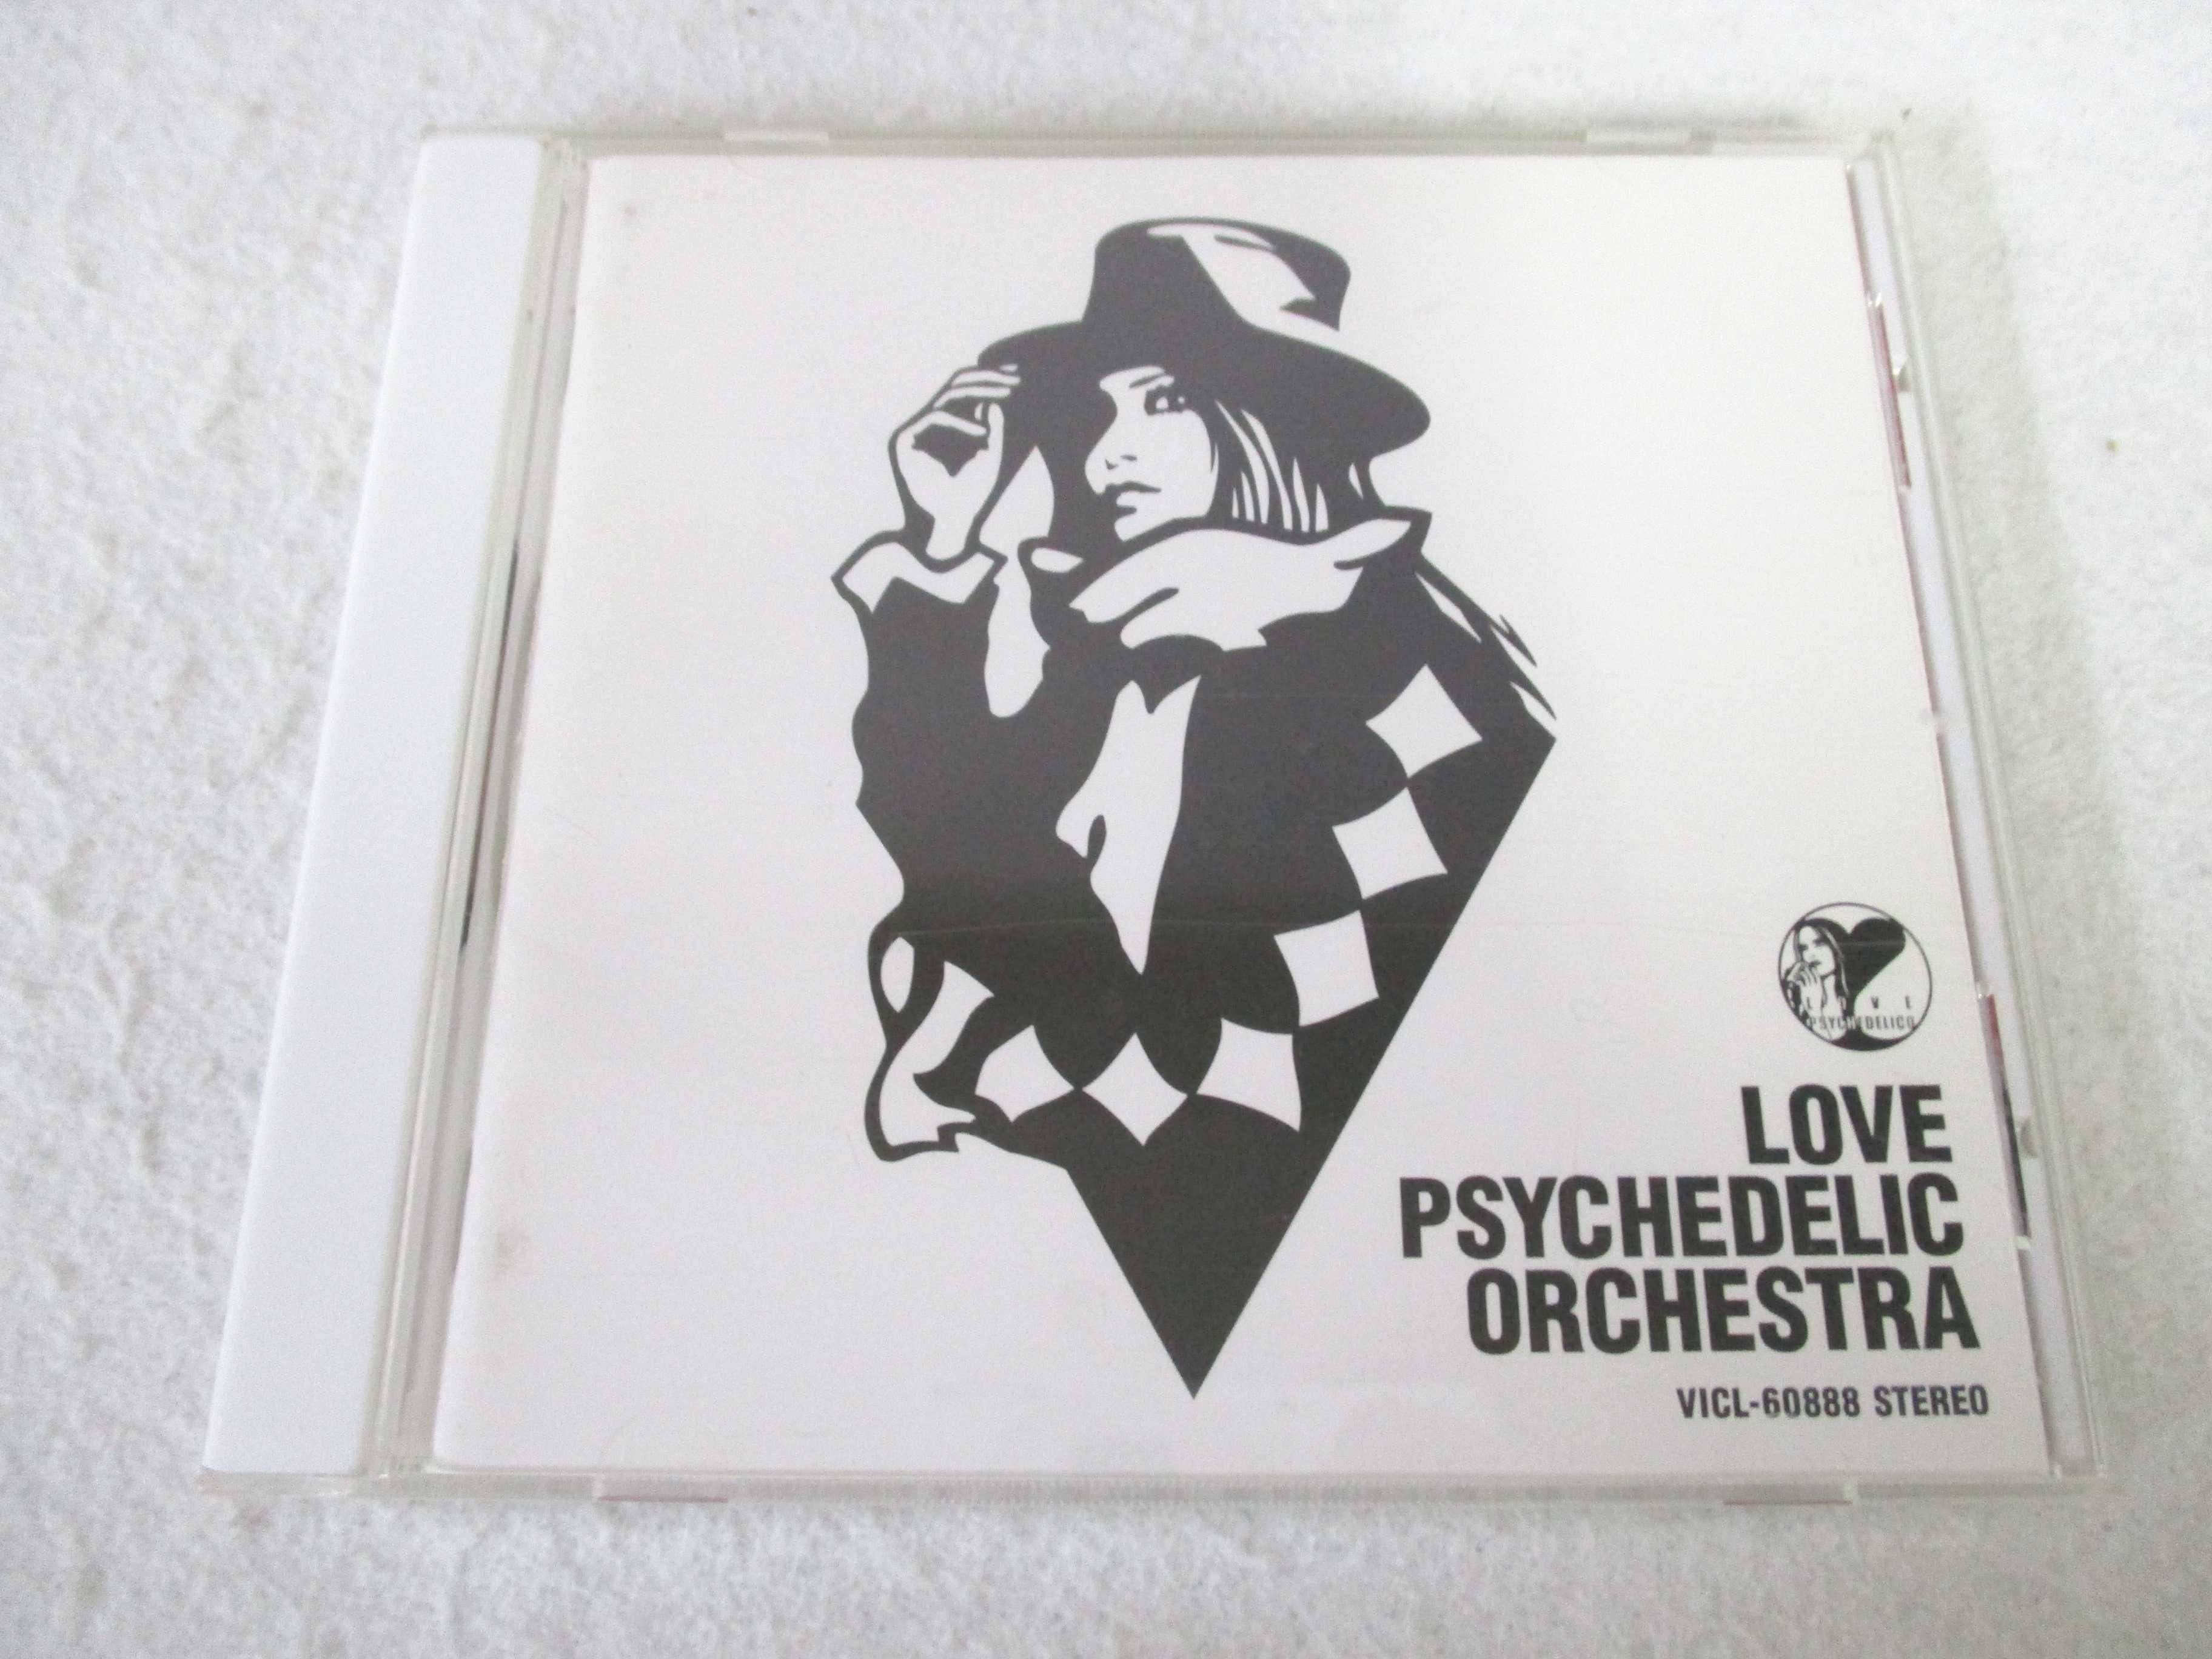 AC05730 【中古】 【CD】 LOVE PSYCHEDELIC ORCHESTRA/LOVE PSYCHEDELICO